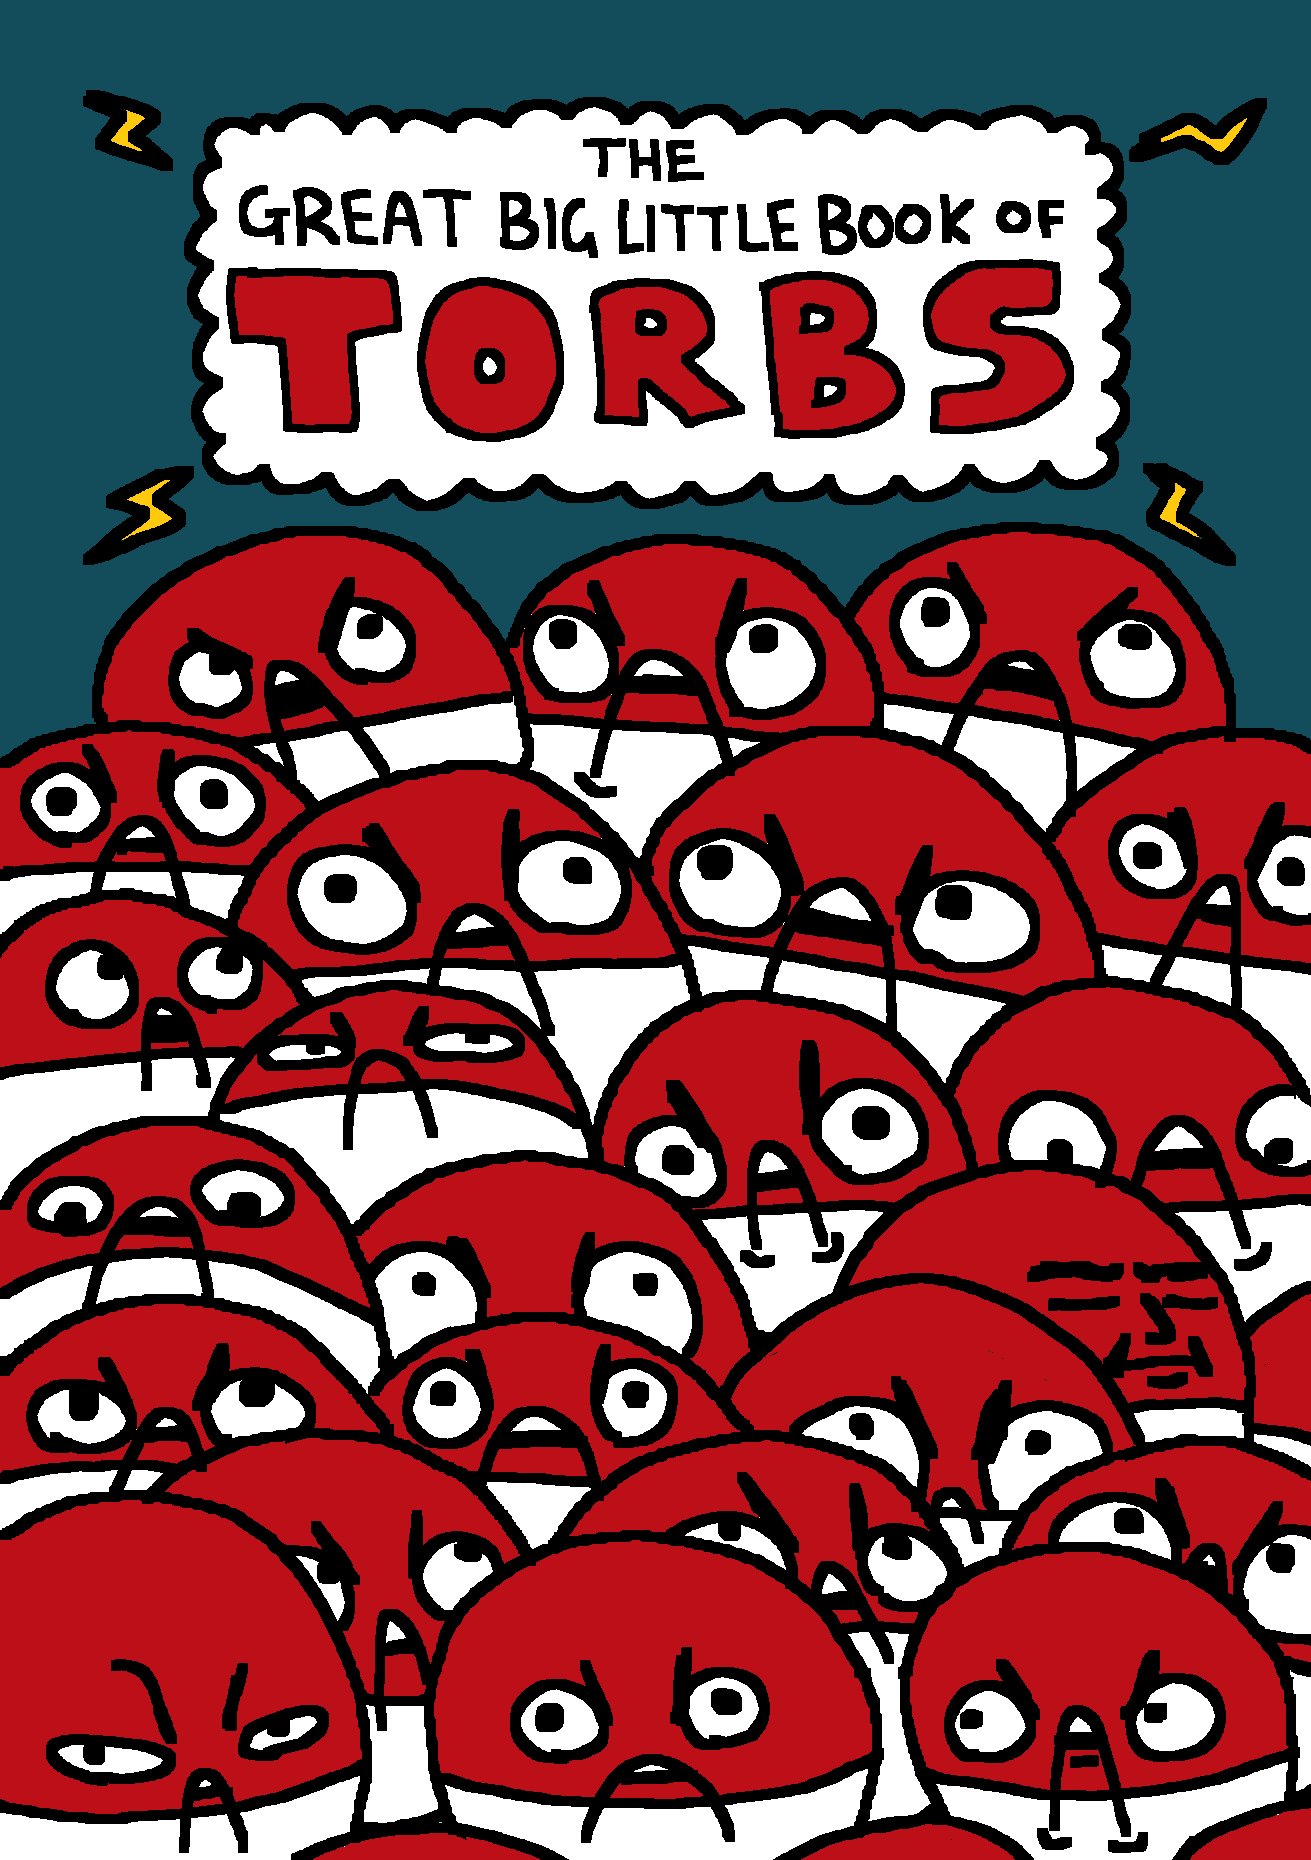 Image of The Great Big Little Book of Torbs